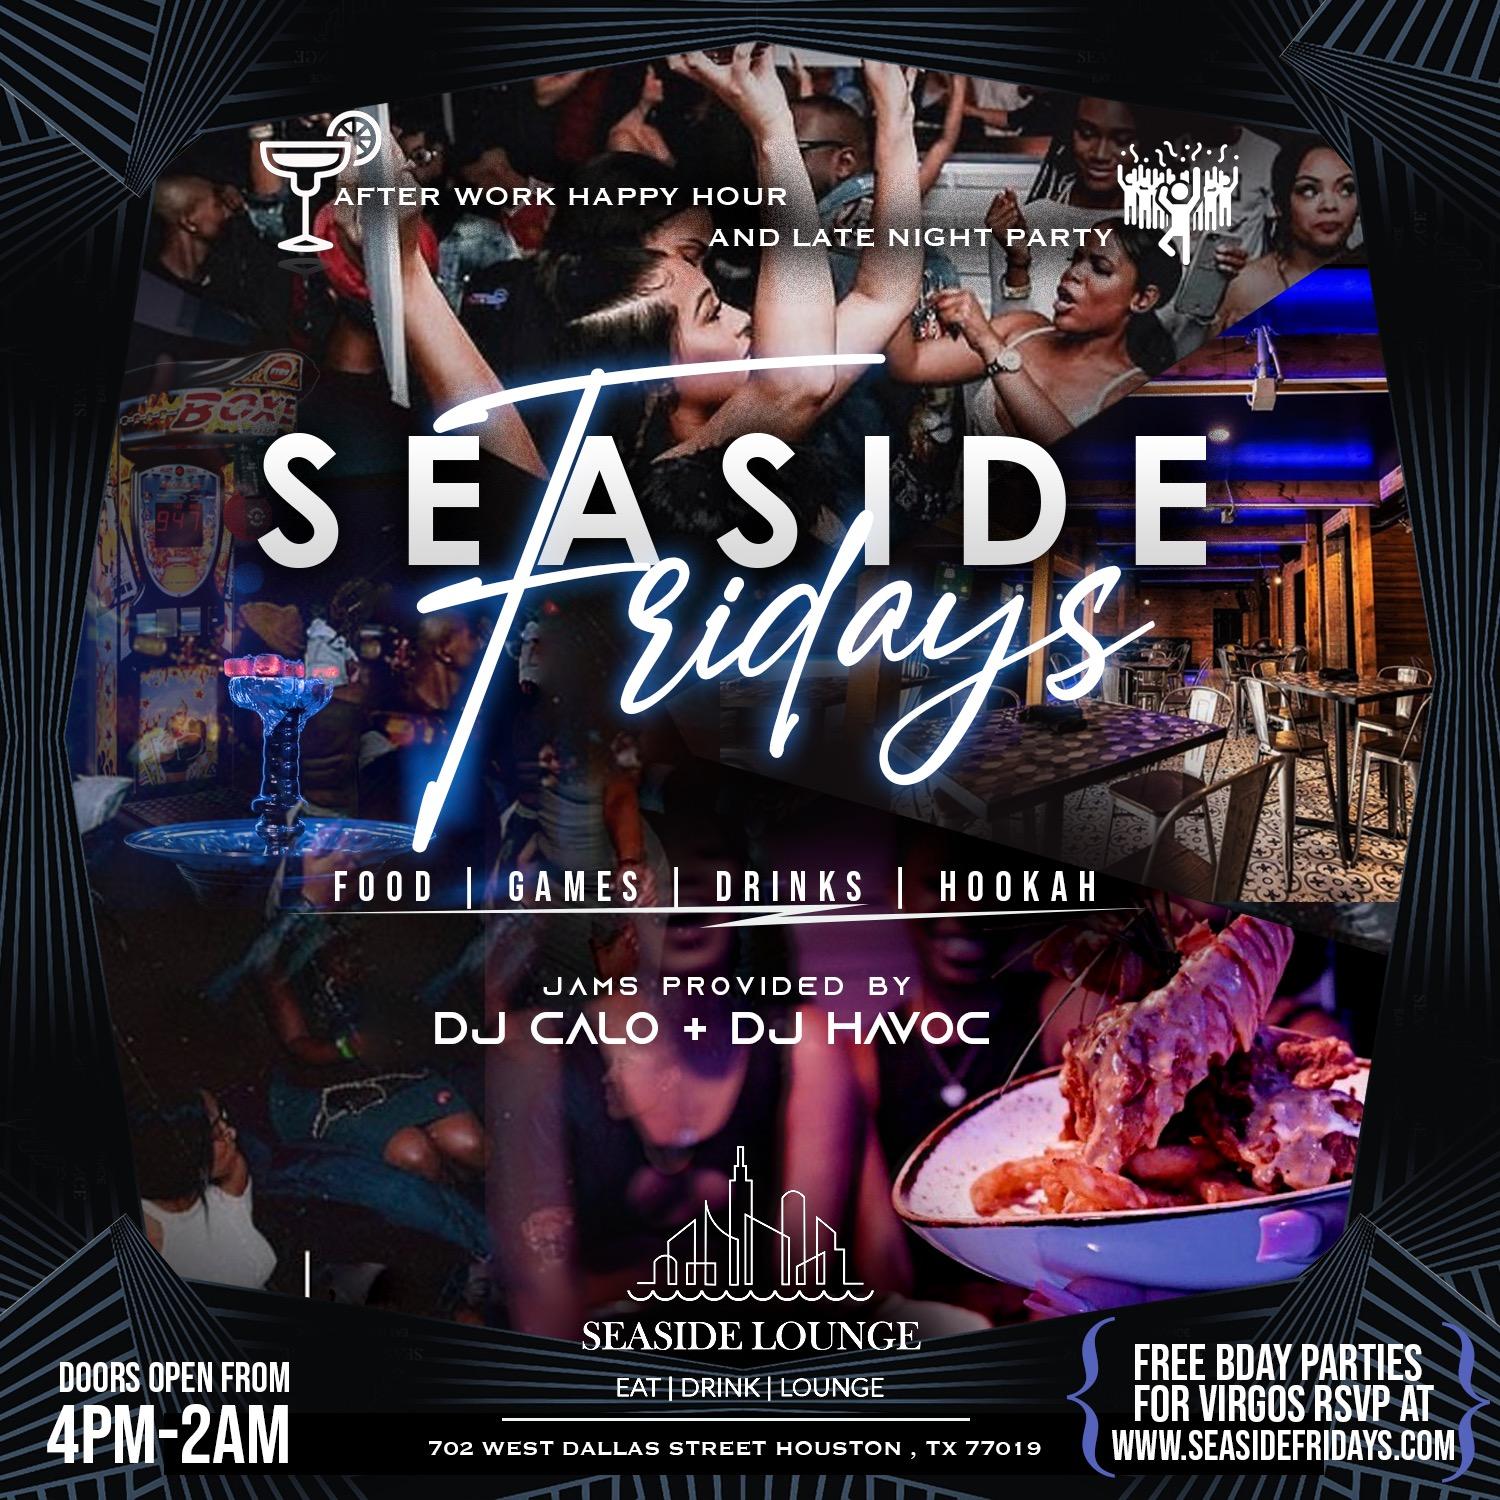 Seaside Friday’s The #1 Friday Destination!